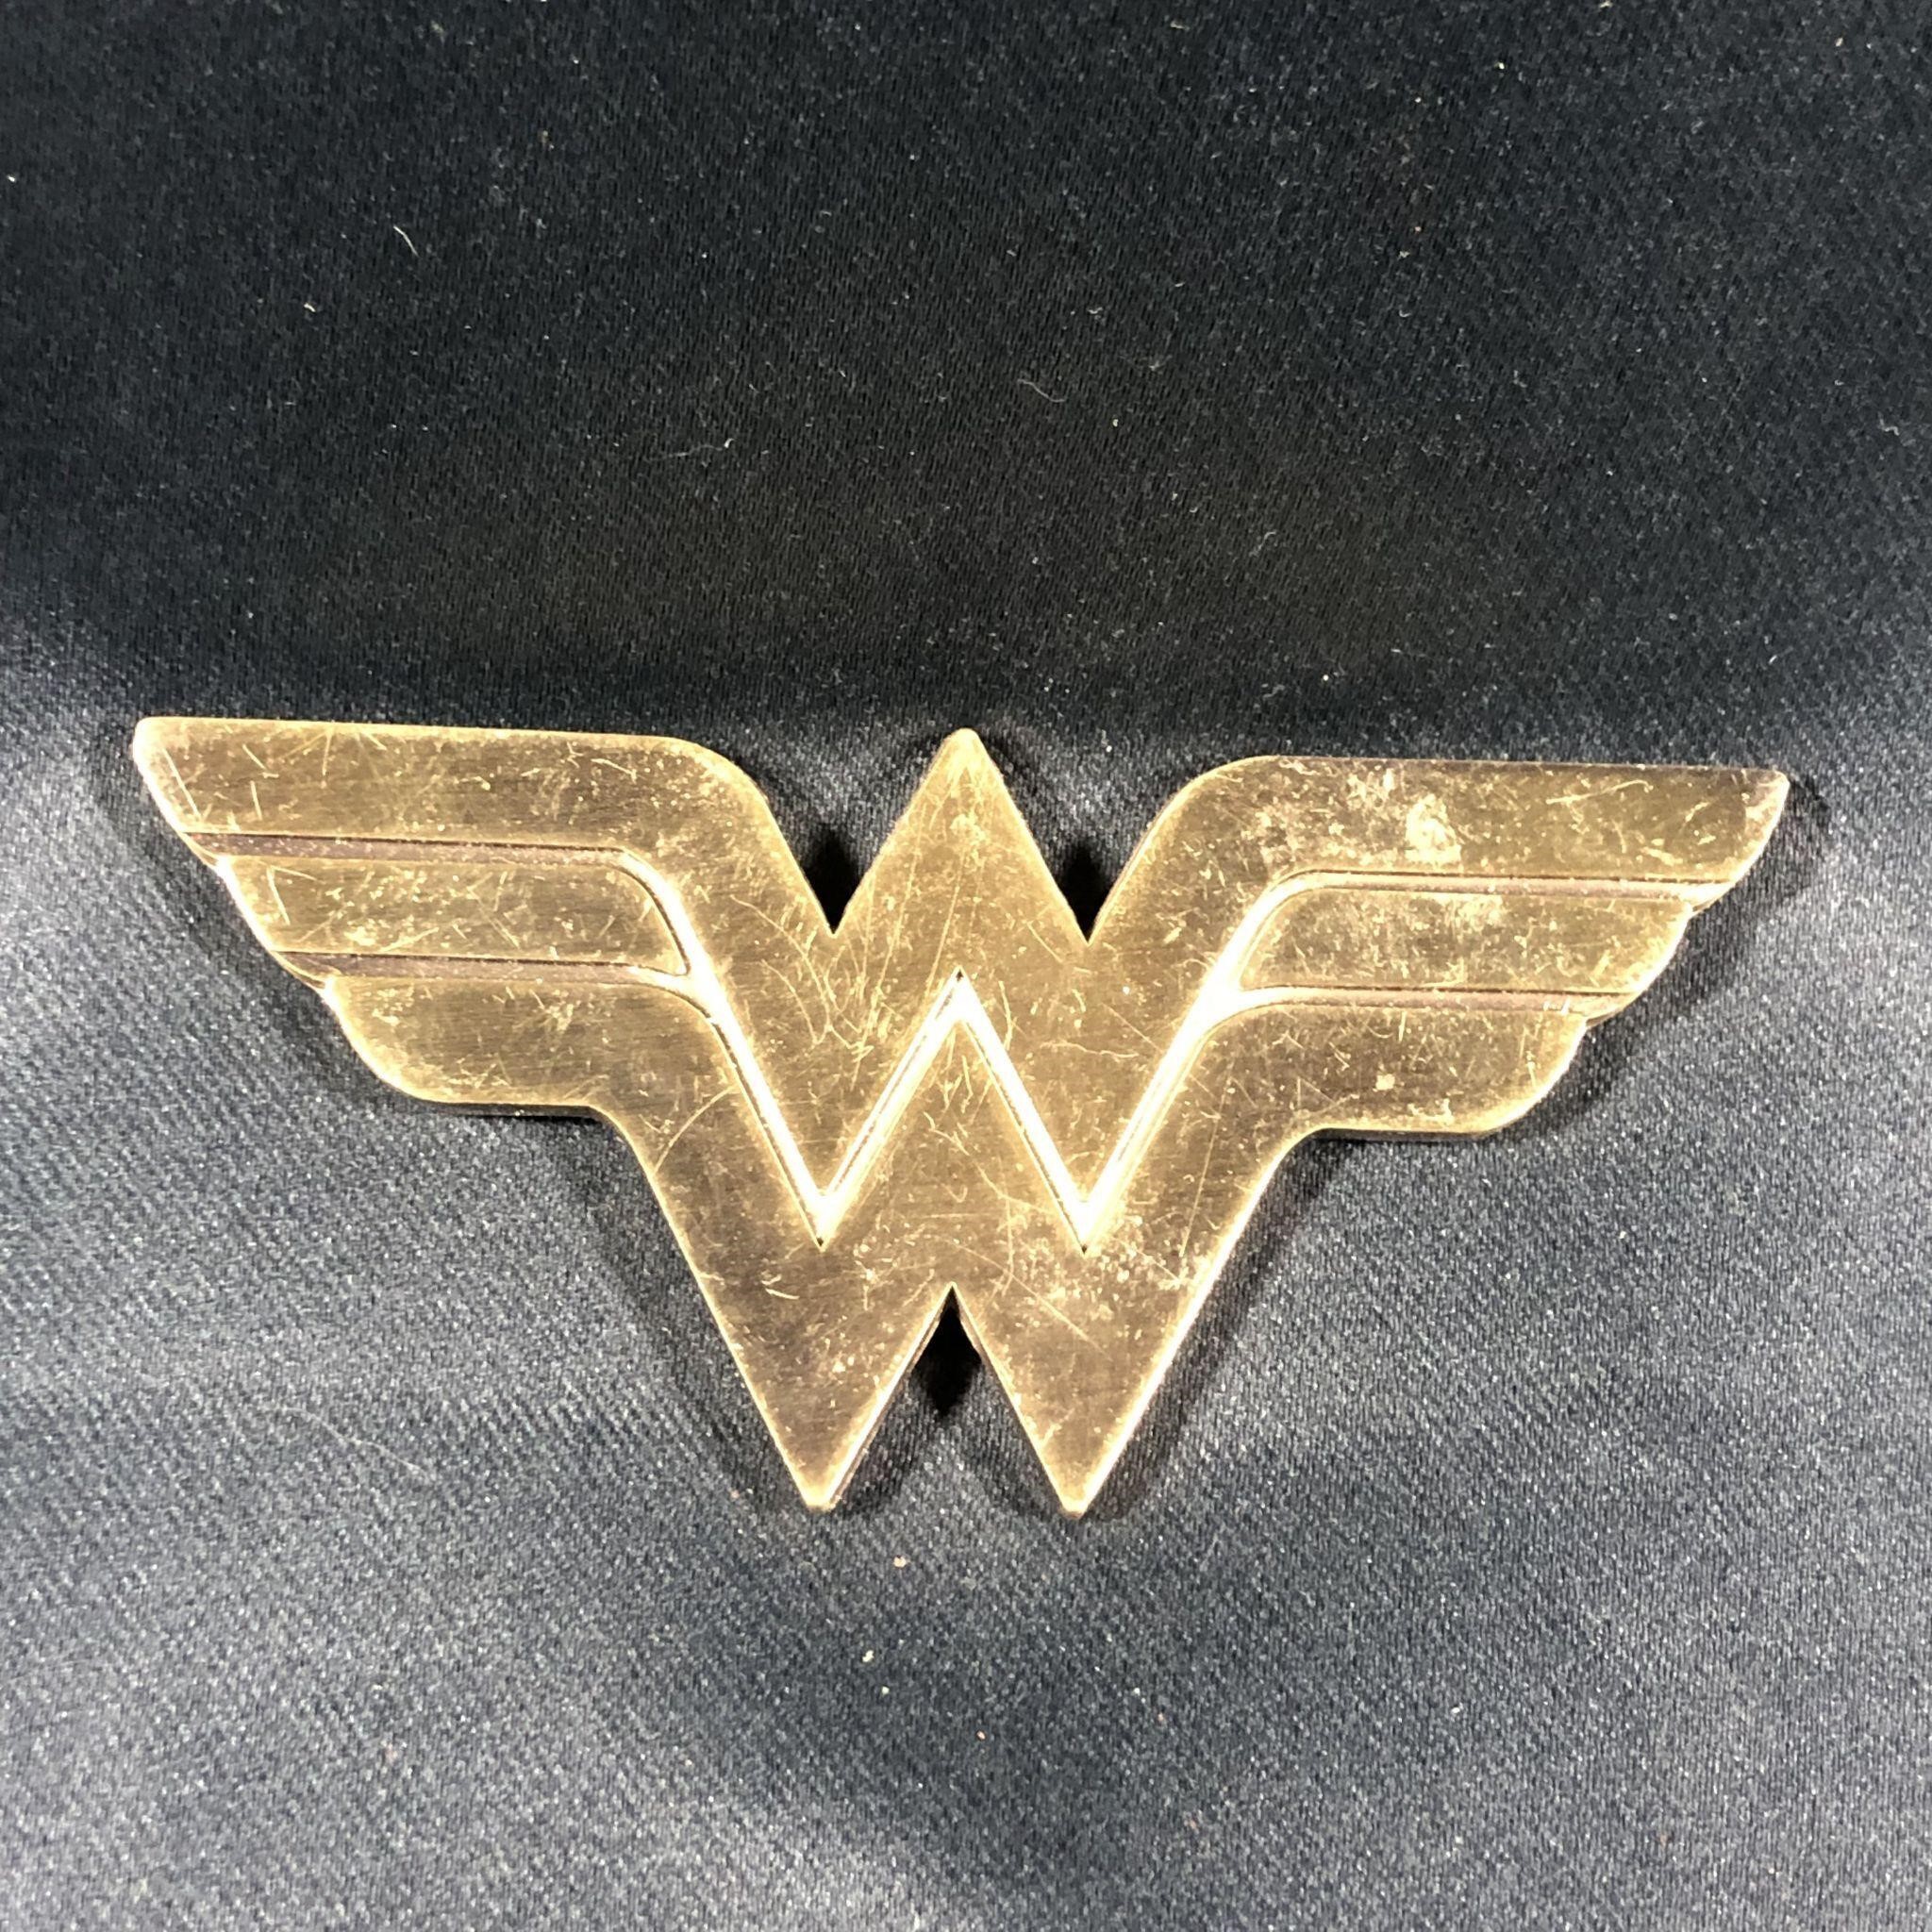 Awesome Wonder Woman Challenge Medal